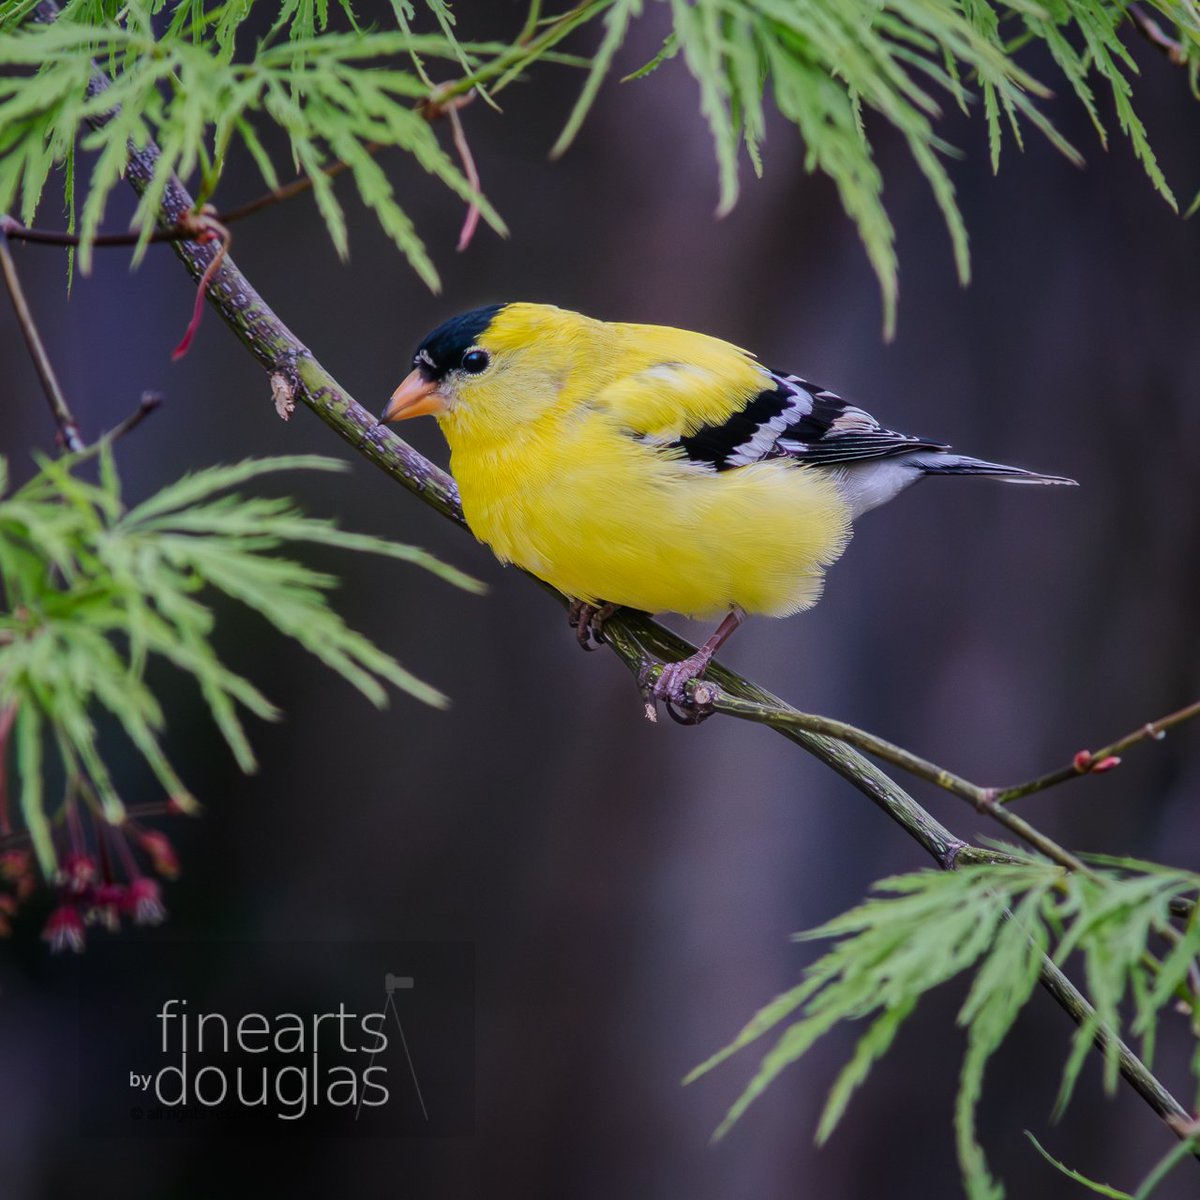 #HappyHumpDay, where is #spring?  where are the #birds? waiting for weather to warm up... longing a visit from these beauties; #ameicangoldfinch #goldfinch #photography #finearts #fineartsbydouglas #WeeklyHumpDayPhoto #artofcreation #nature #yellow #connectionwithnature #backyard